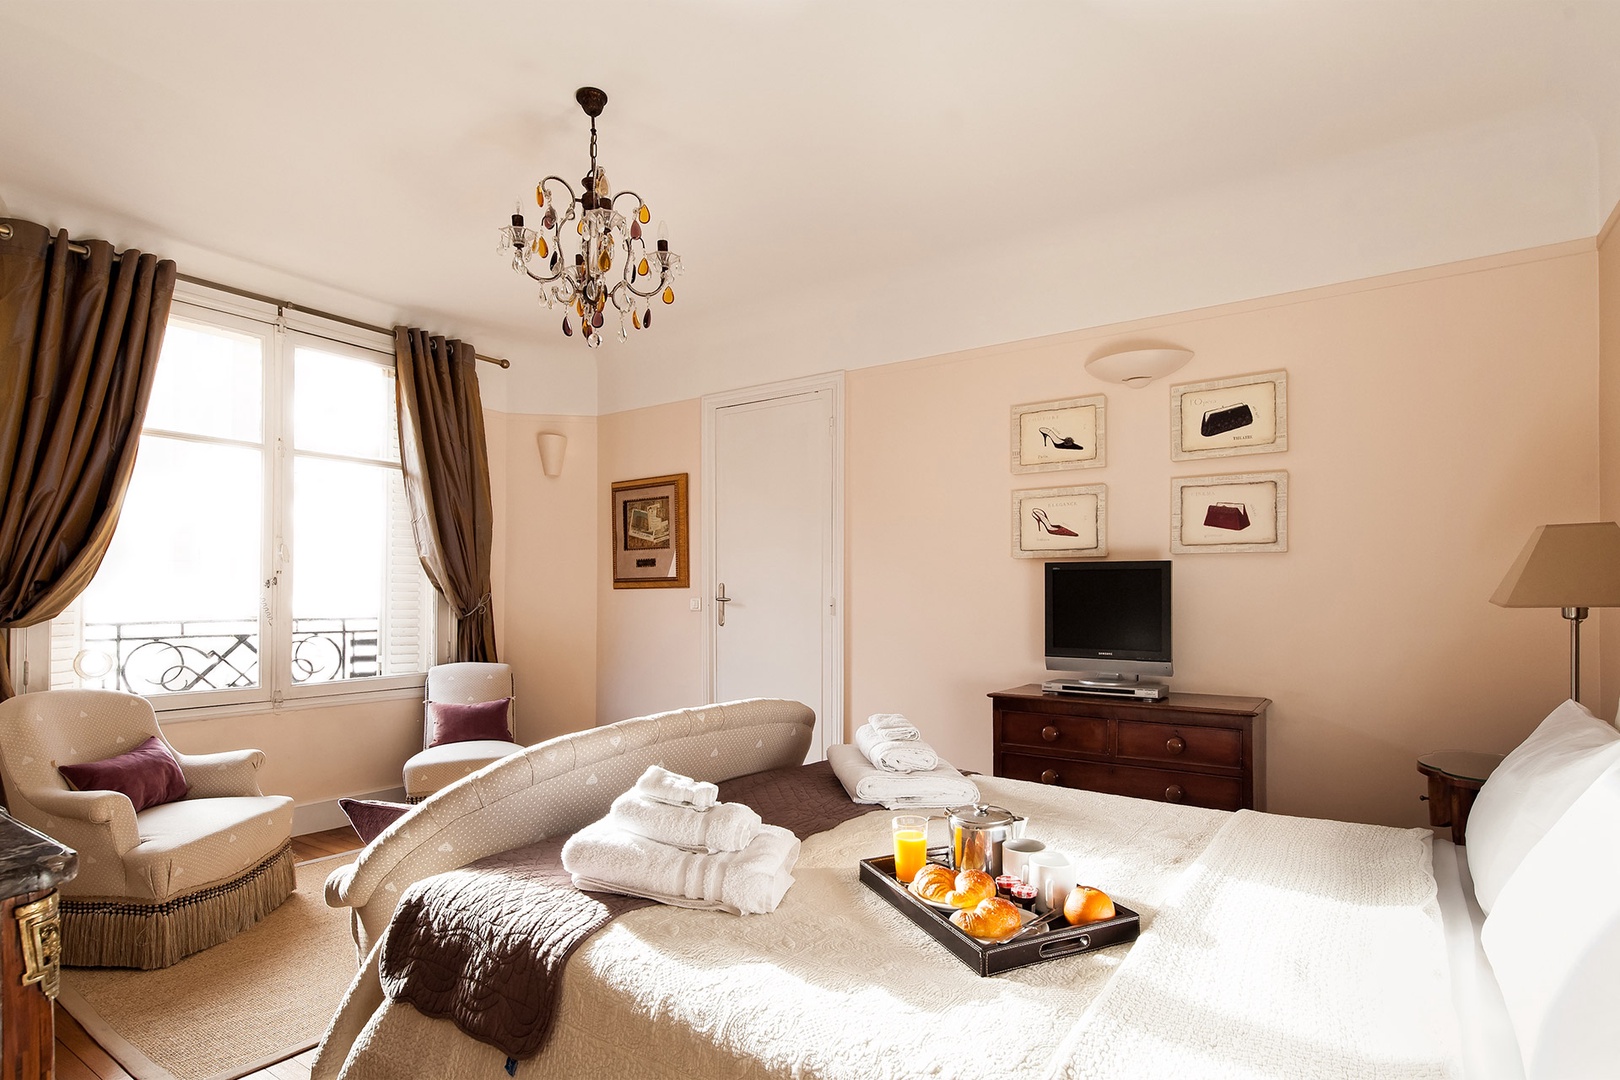 Relax in the spacious bedroom with a comfortable bed and en suite bathroom.